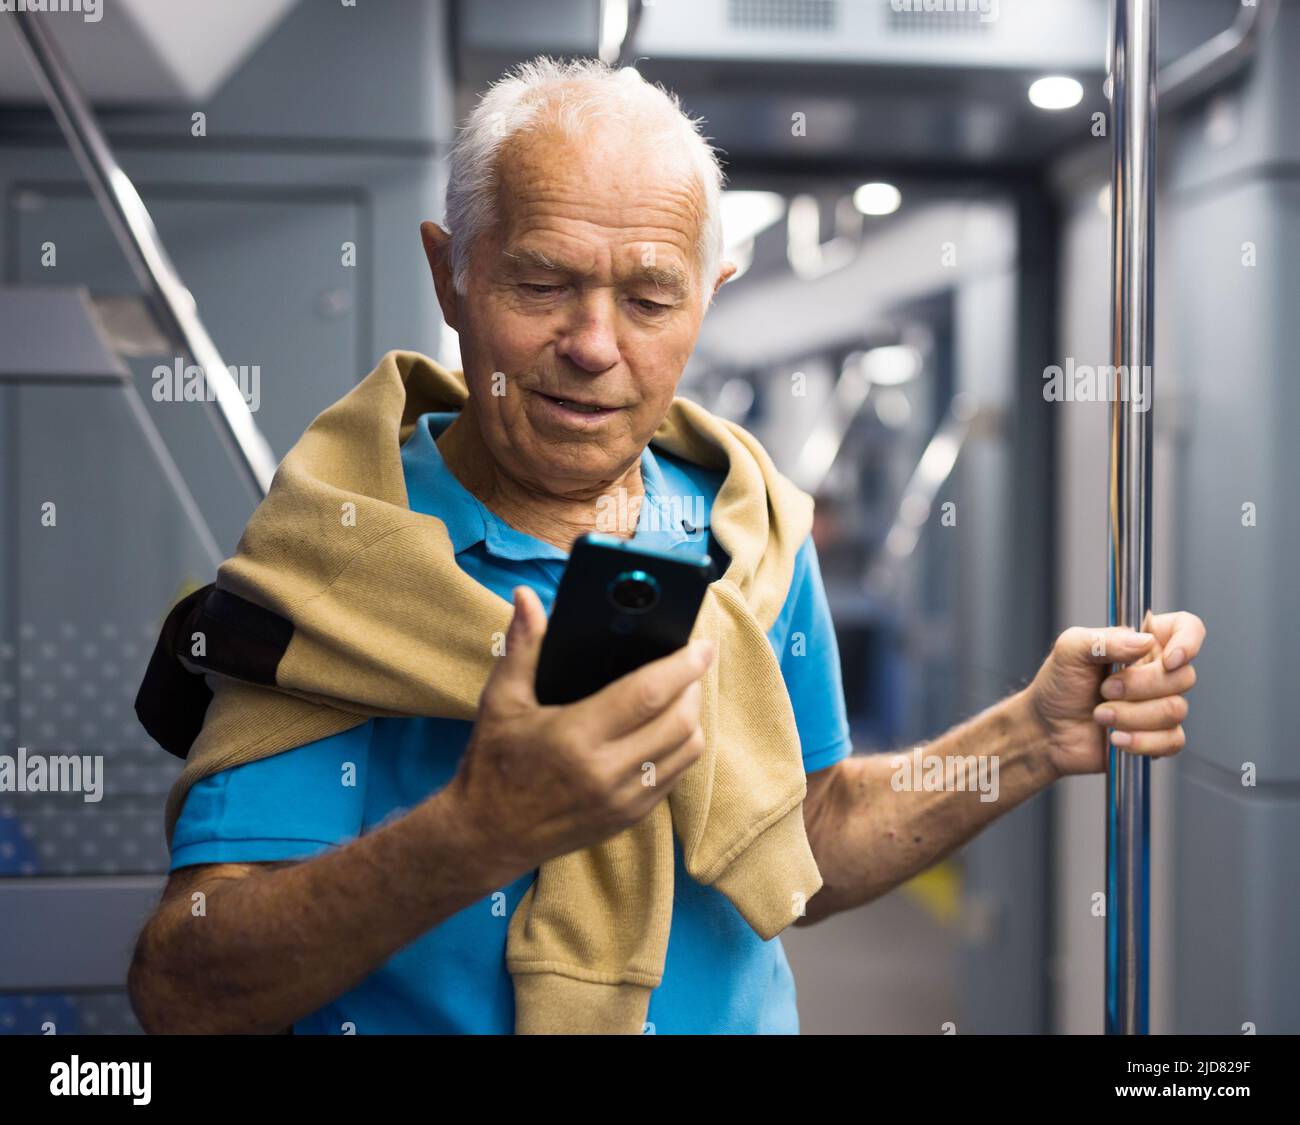 Old man with phone in subway car Stock Photo